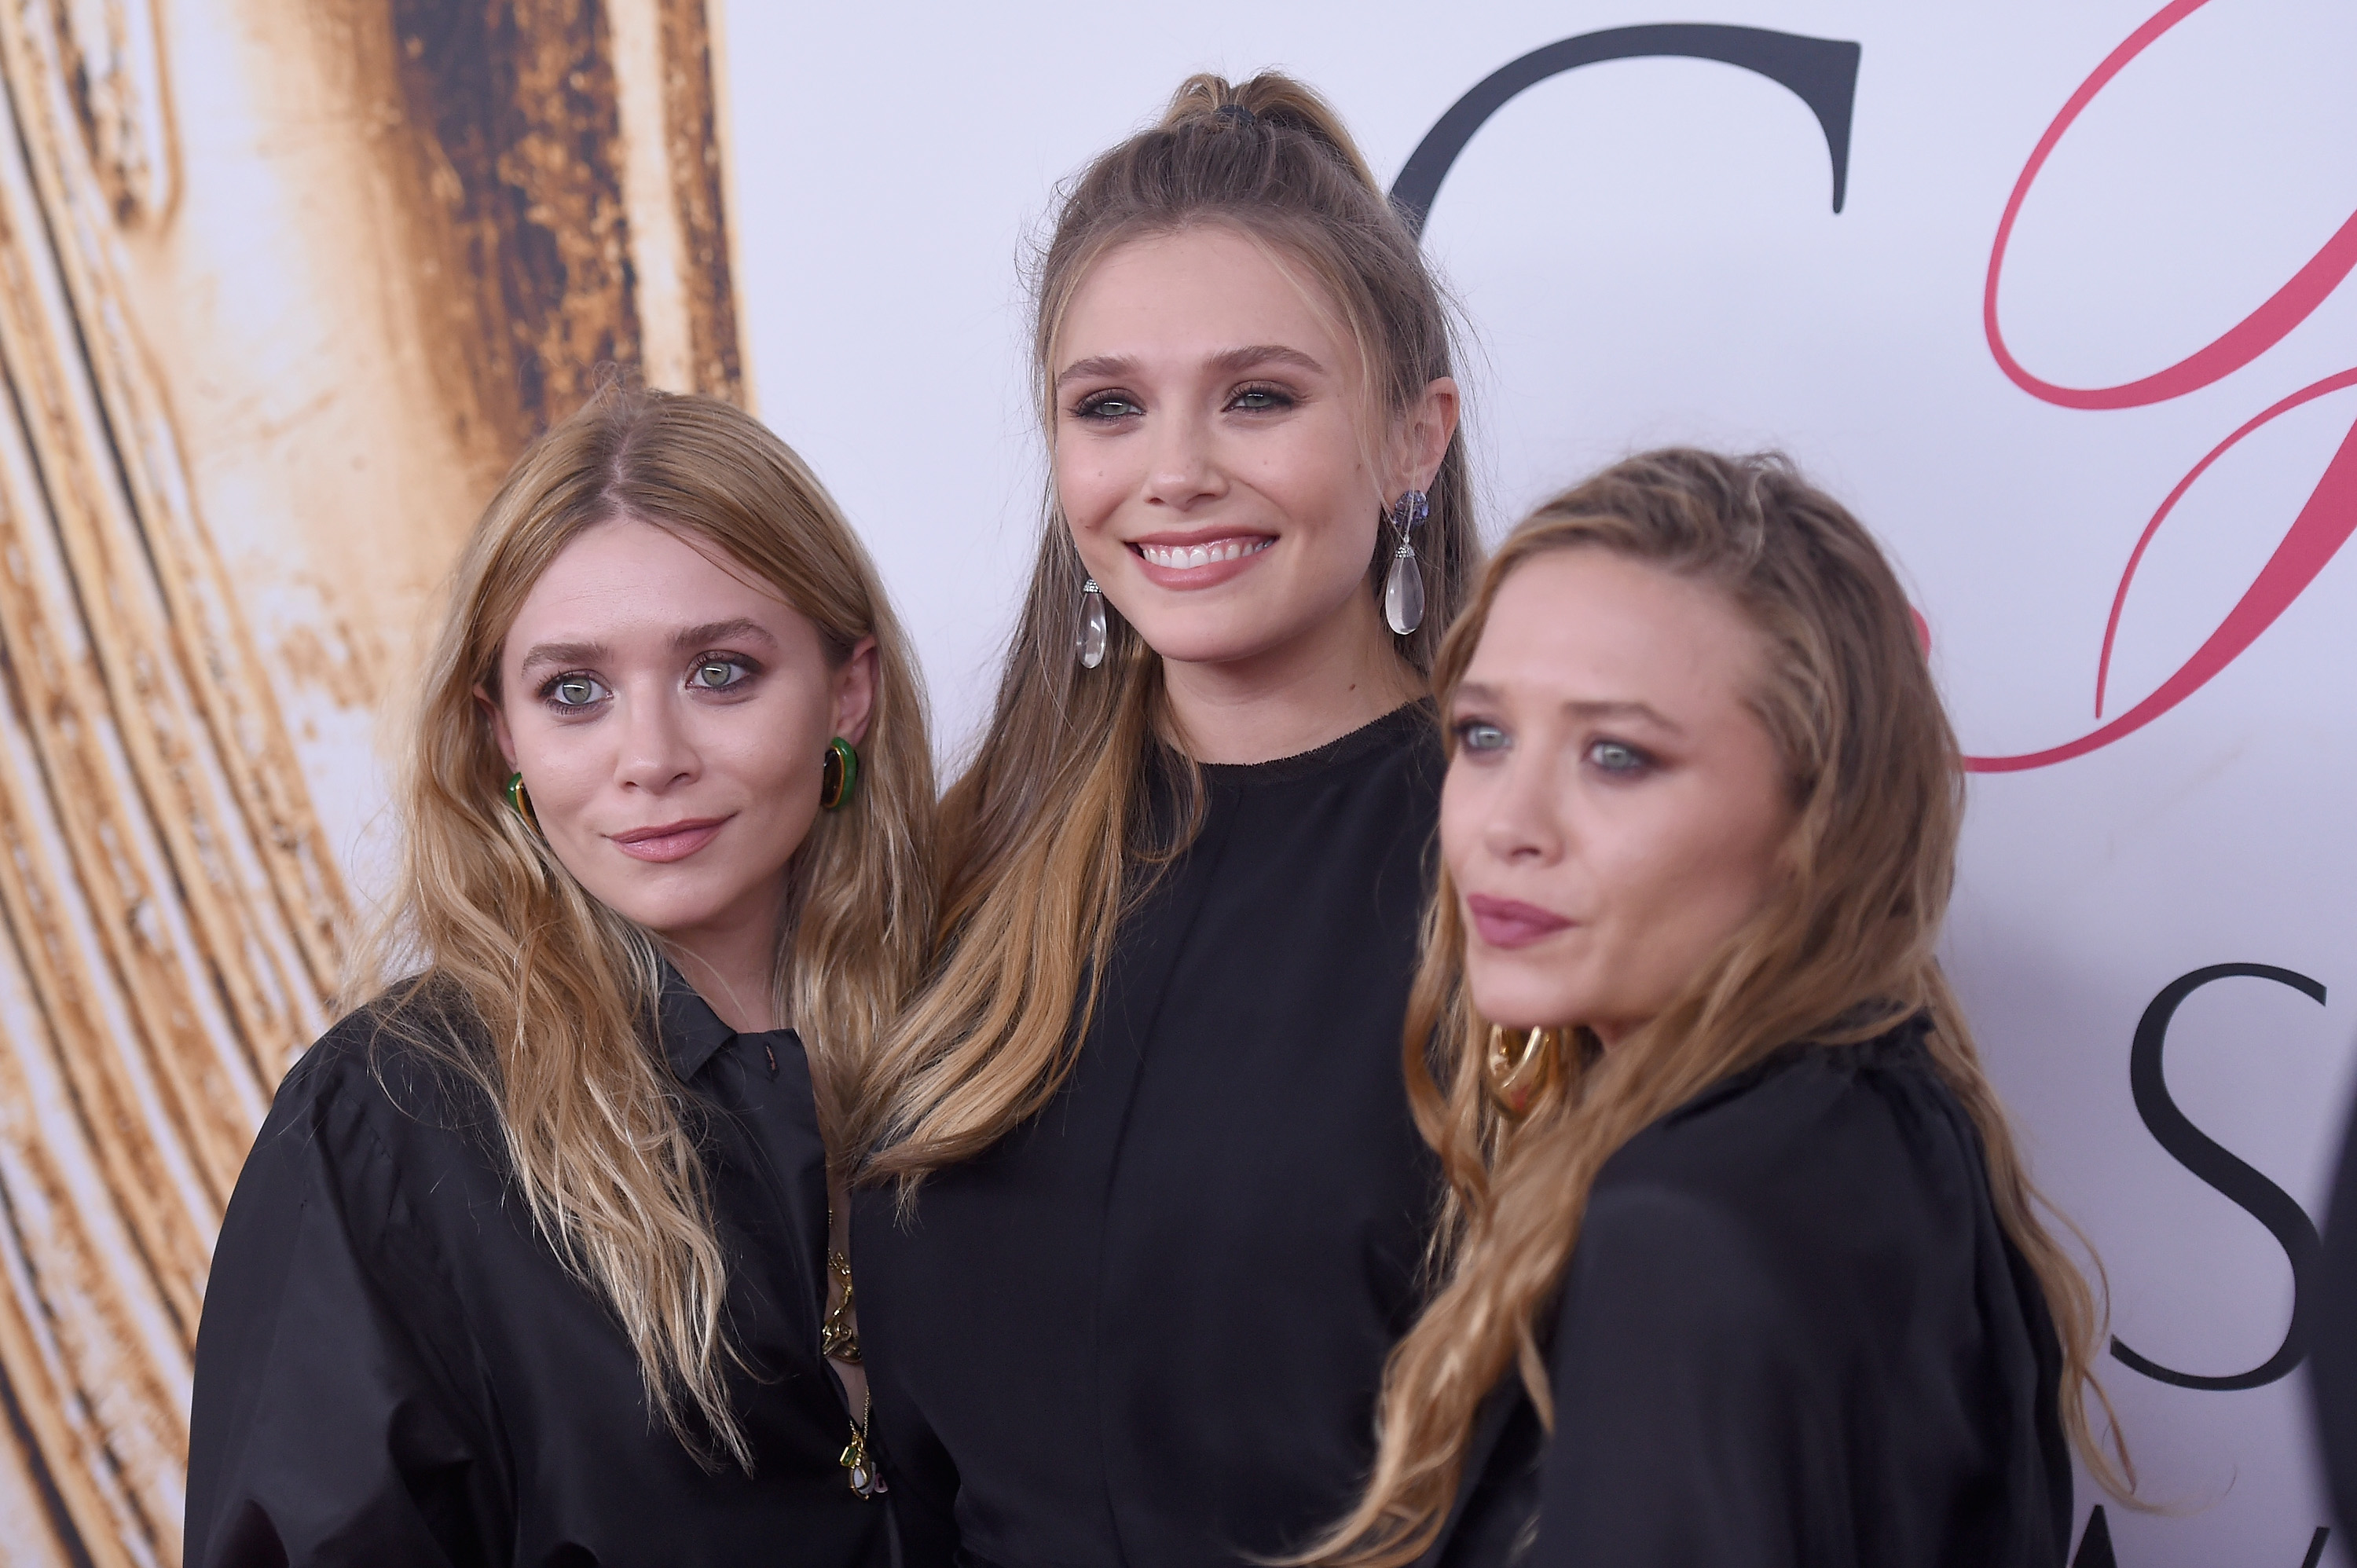 Elizabeth Olsen (center) with Mary-Kate and Ashley Olsen appear at the 2016 CFDA Fashion Awards at the Hammerstein Ballroom